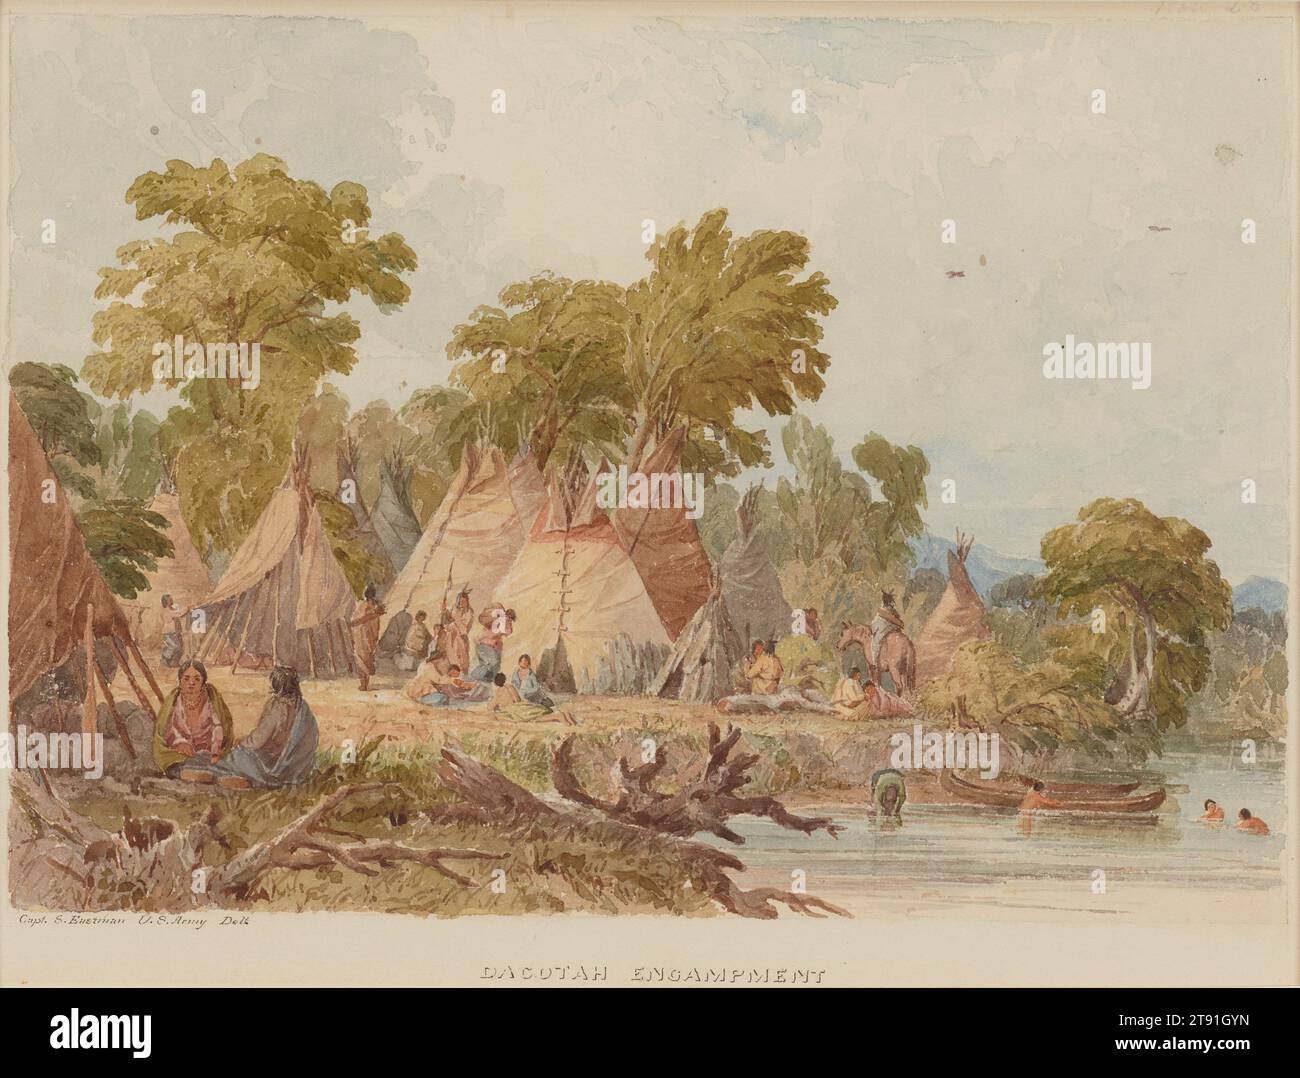 Dacotah Encampment, 1849-1855, Seth Eastman, American, 1808–1875, 7 × 10 in. (17.78 × 25.4 cm) (image)10 × 13 3/16 in. (25.4 × 33.5 cm) (sheet), Watercolor, United States, 19th century, Before Captain Eastman’s long residence at Fort Snelling, he was posted there briefly in 1830 as a 22-year-old lieutenant. Within a year, he had married a Dakota chief’s daughter, Wakaninajinwin, or Stands Sacred, and had a daughter, known as Nancy Eastman. Although Eastman would return to the fort ten years later with a new wife, this early union undoubtedly opened him to the domestic side of Dakota life. Stock Photo